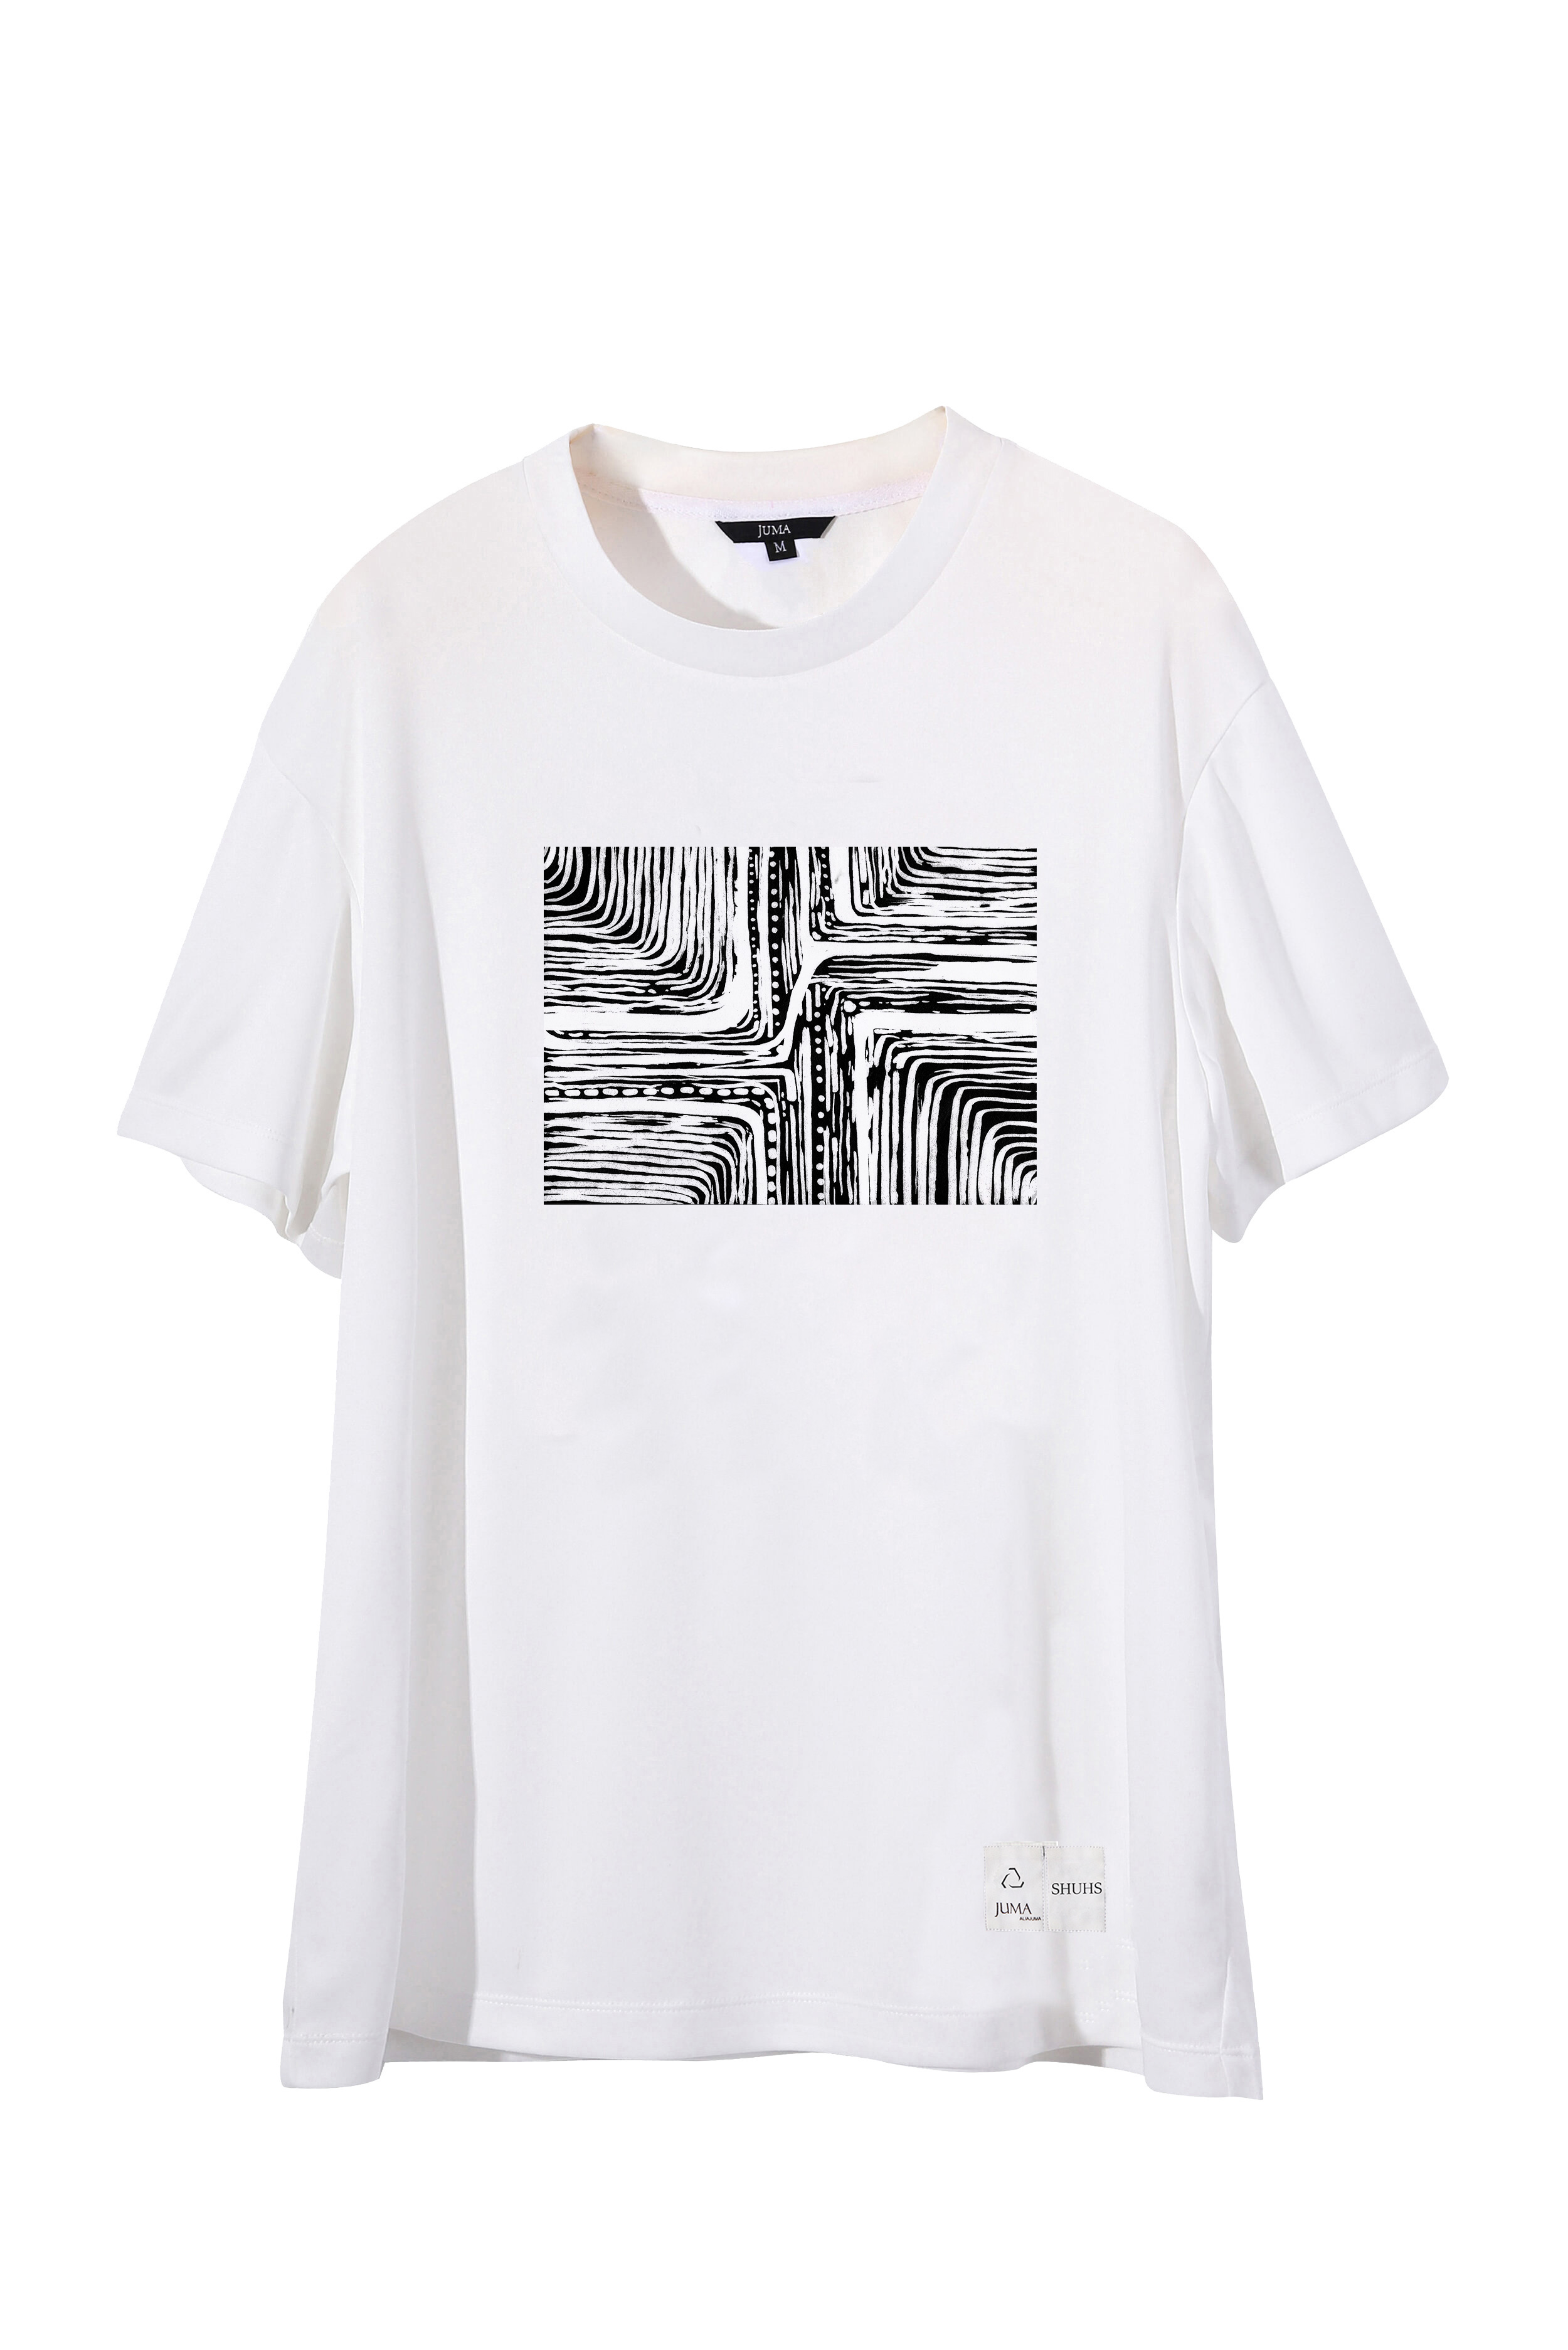 Recharge 印花 1 件 T 恤 - 4 个再生水瓶 - 奶油｜Recharge Print 1 T-Shirt - 4 Recycled Water Bottles-Cream